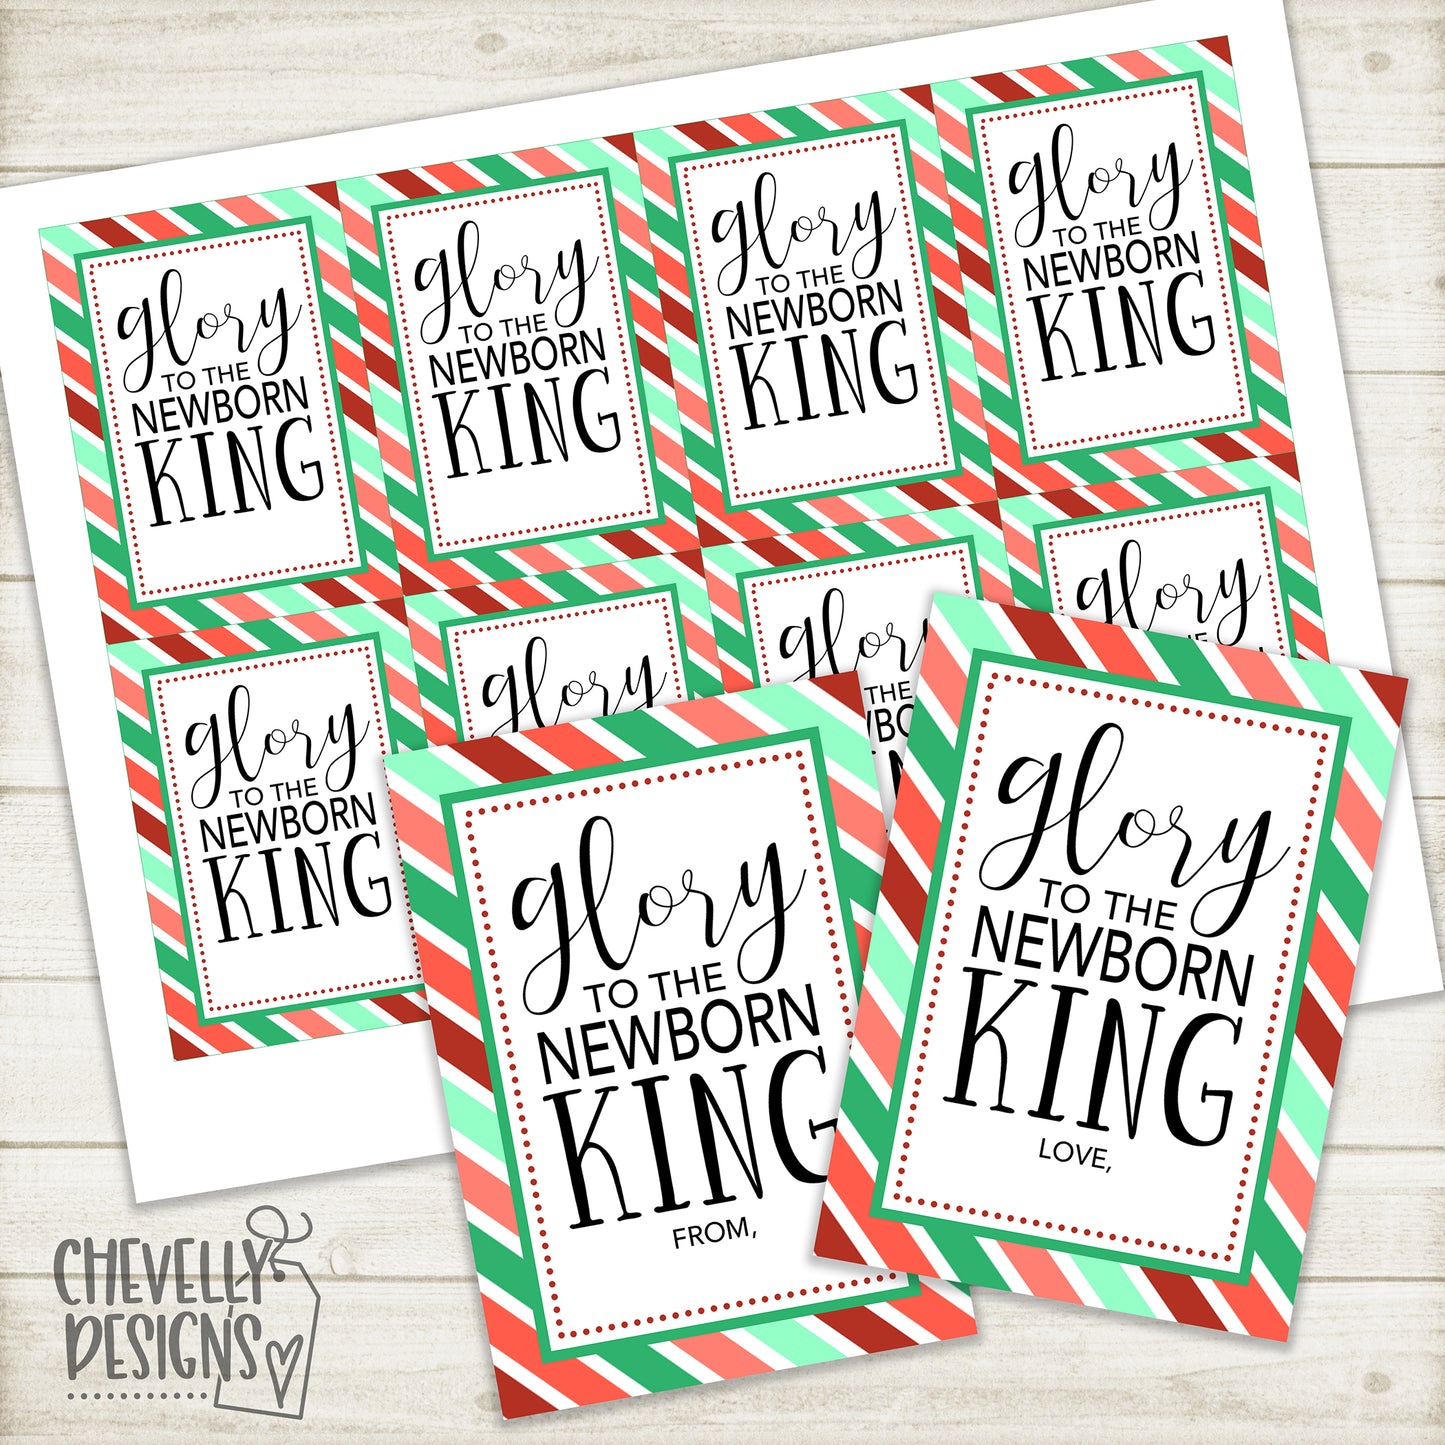 Printable Christmas Gift Tags - Glory to the Newborn King with Holiday Frame >>>Instant Digital Download<<<